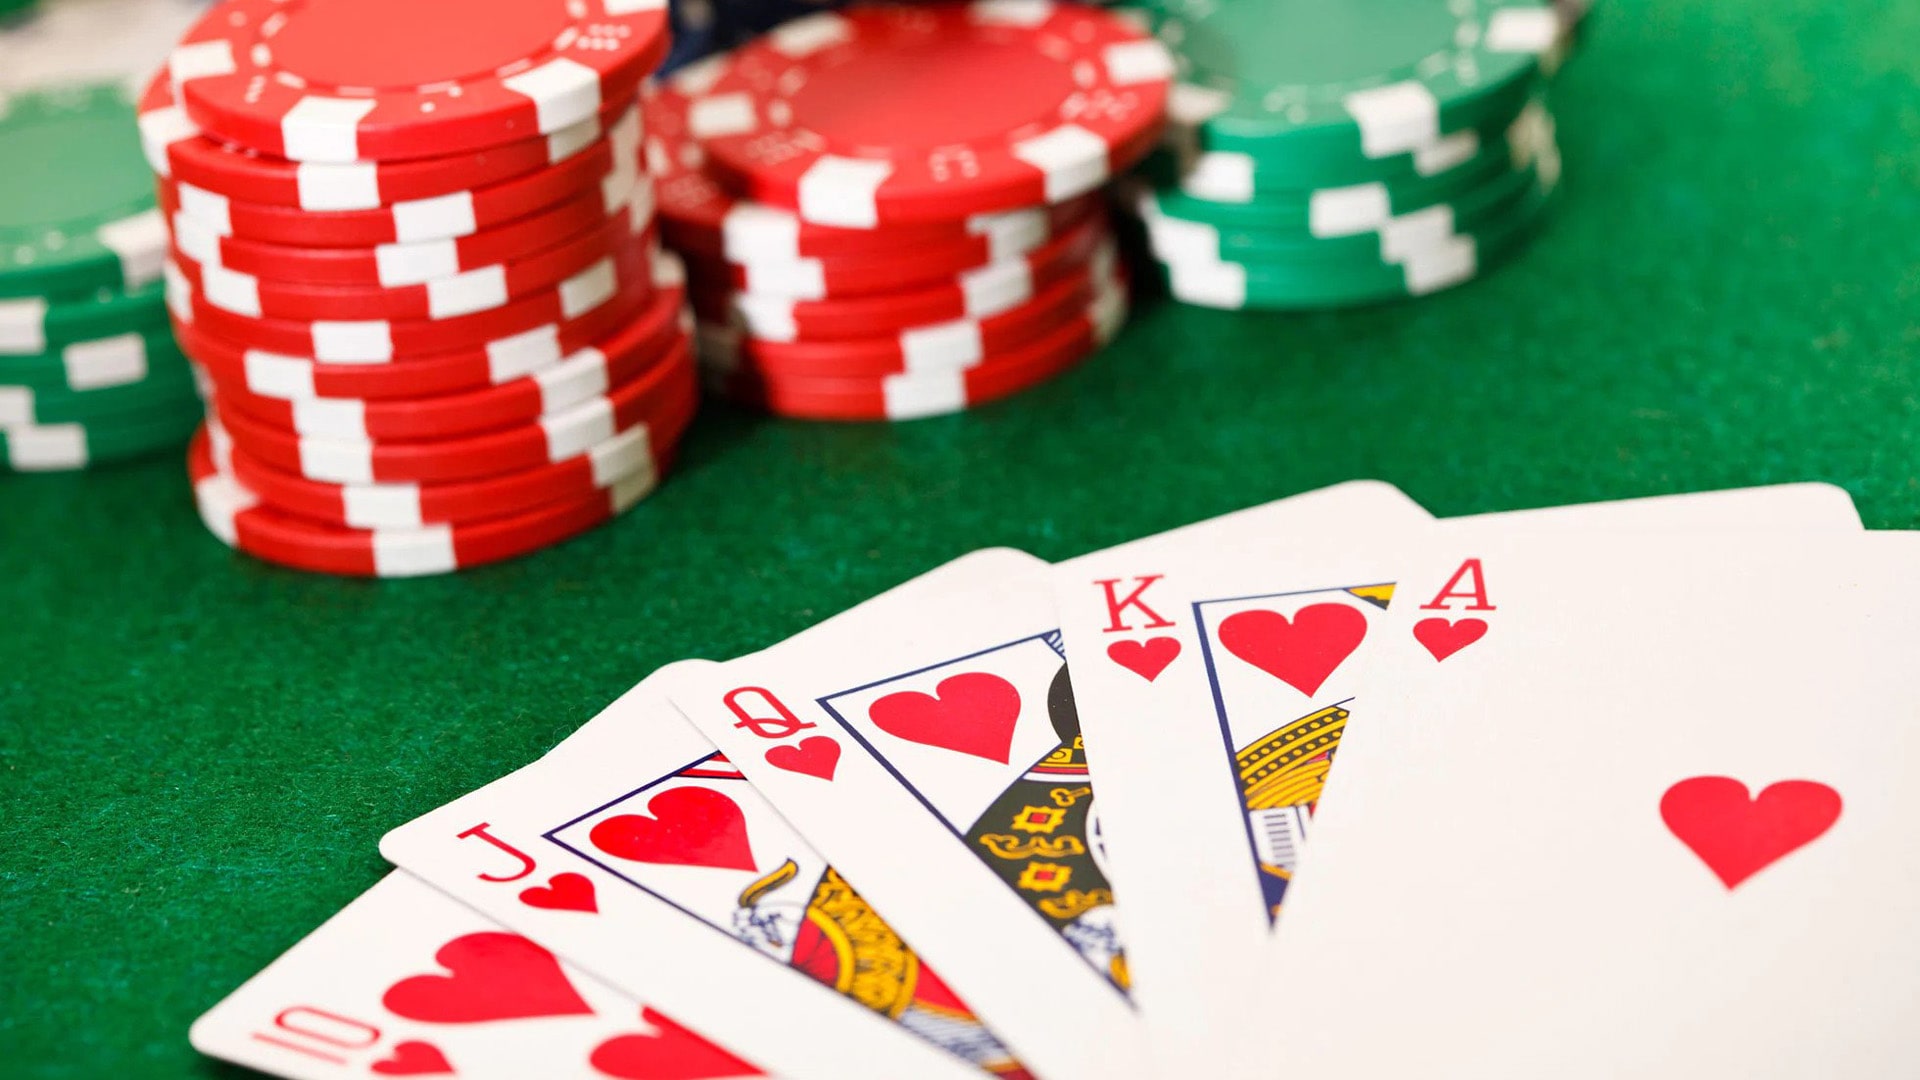 A close-up view of a poker game in action, showcasing playing cards and chips on a classic green table.